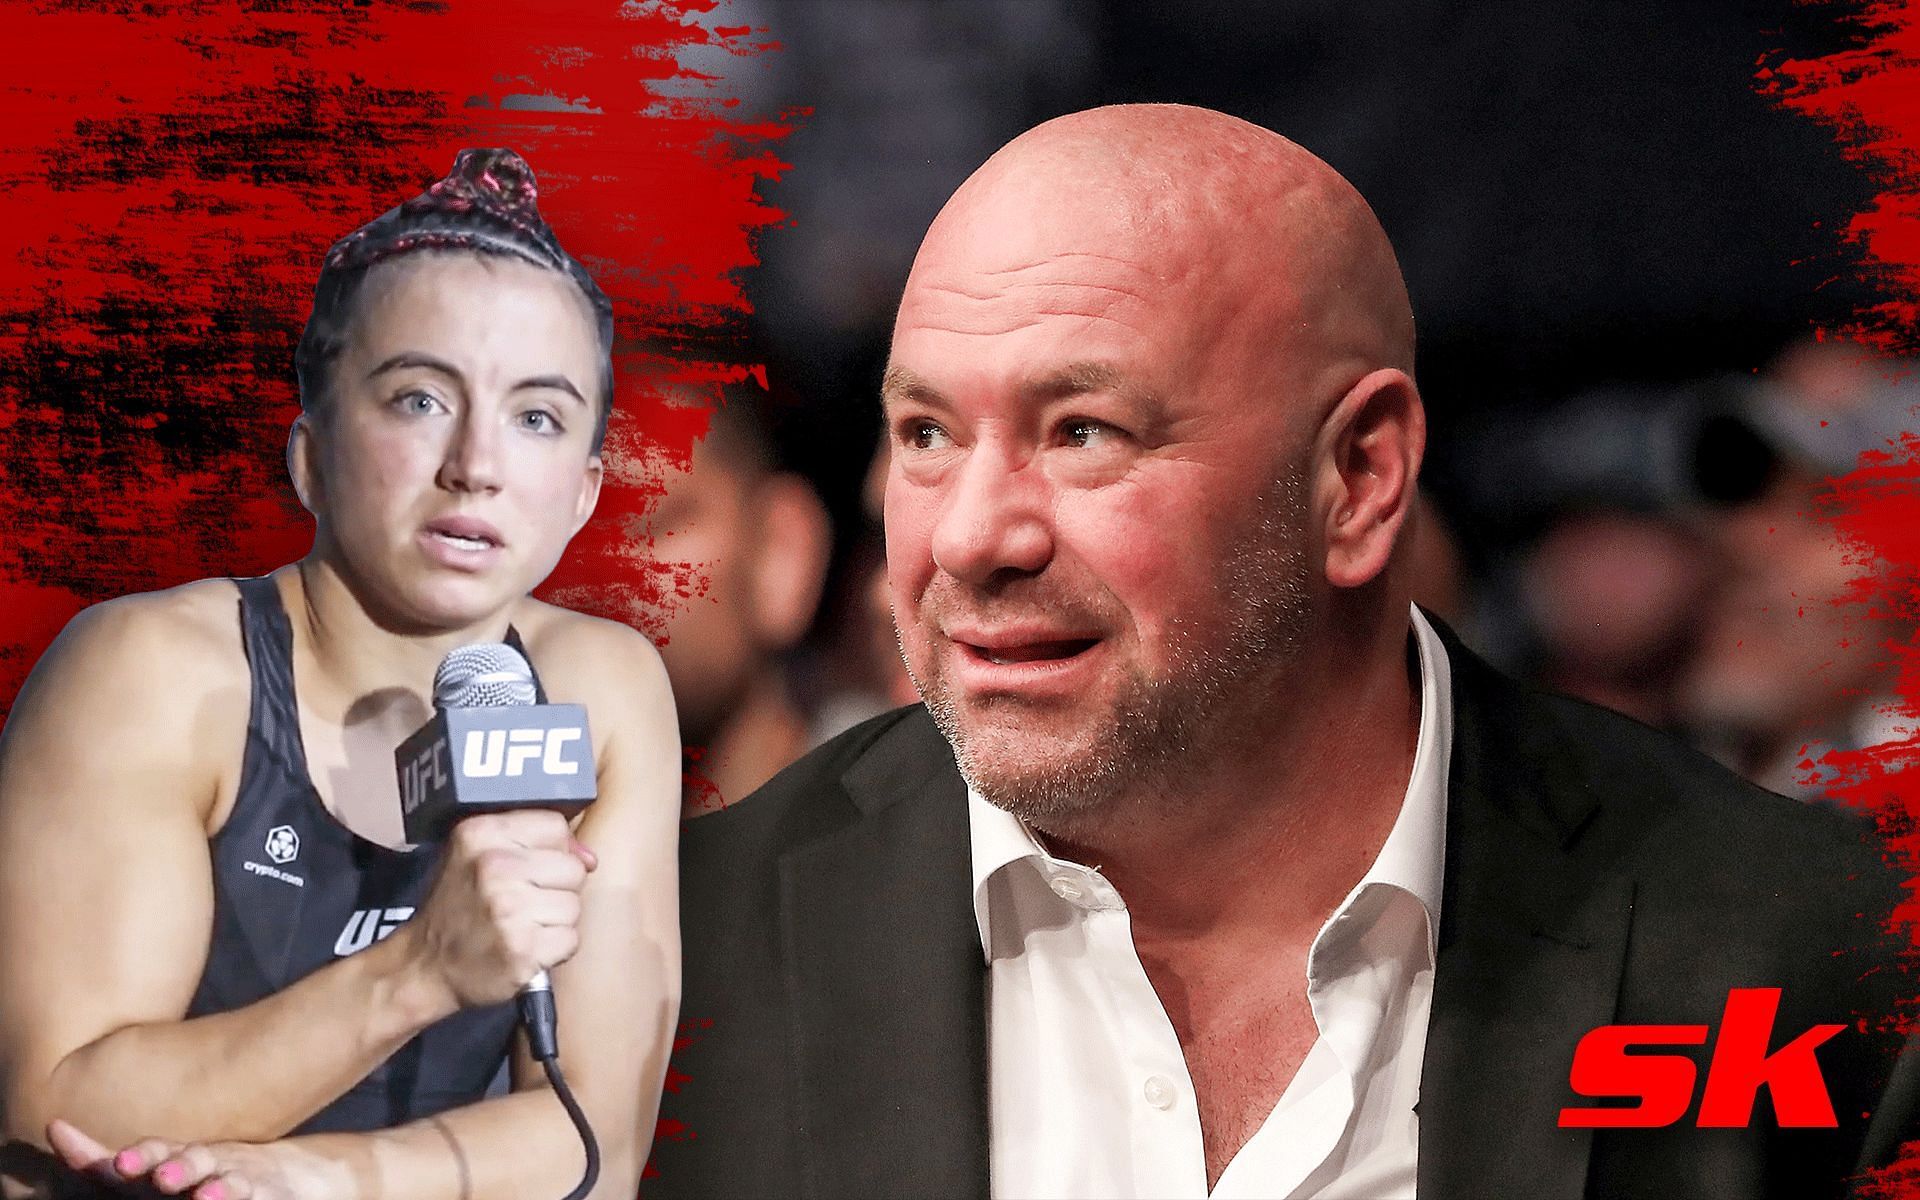 Maycee Barber (left) and Dana White (right) [Image credits: Barber from Sportskeeda MMA&#039;s YouTube channel and White from Getty]